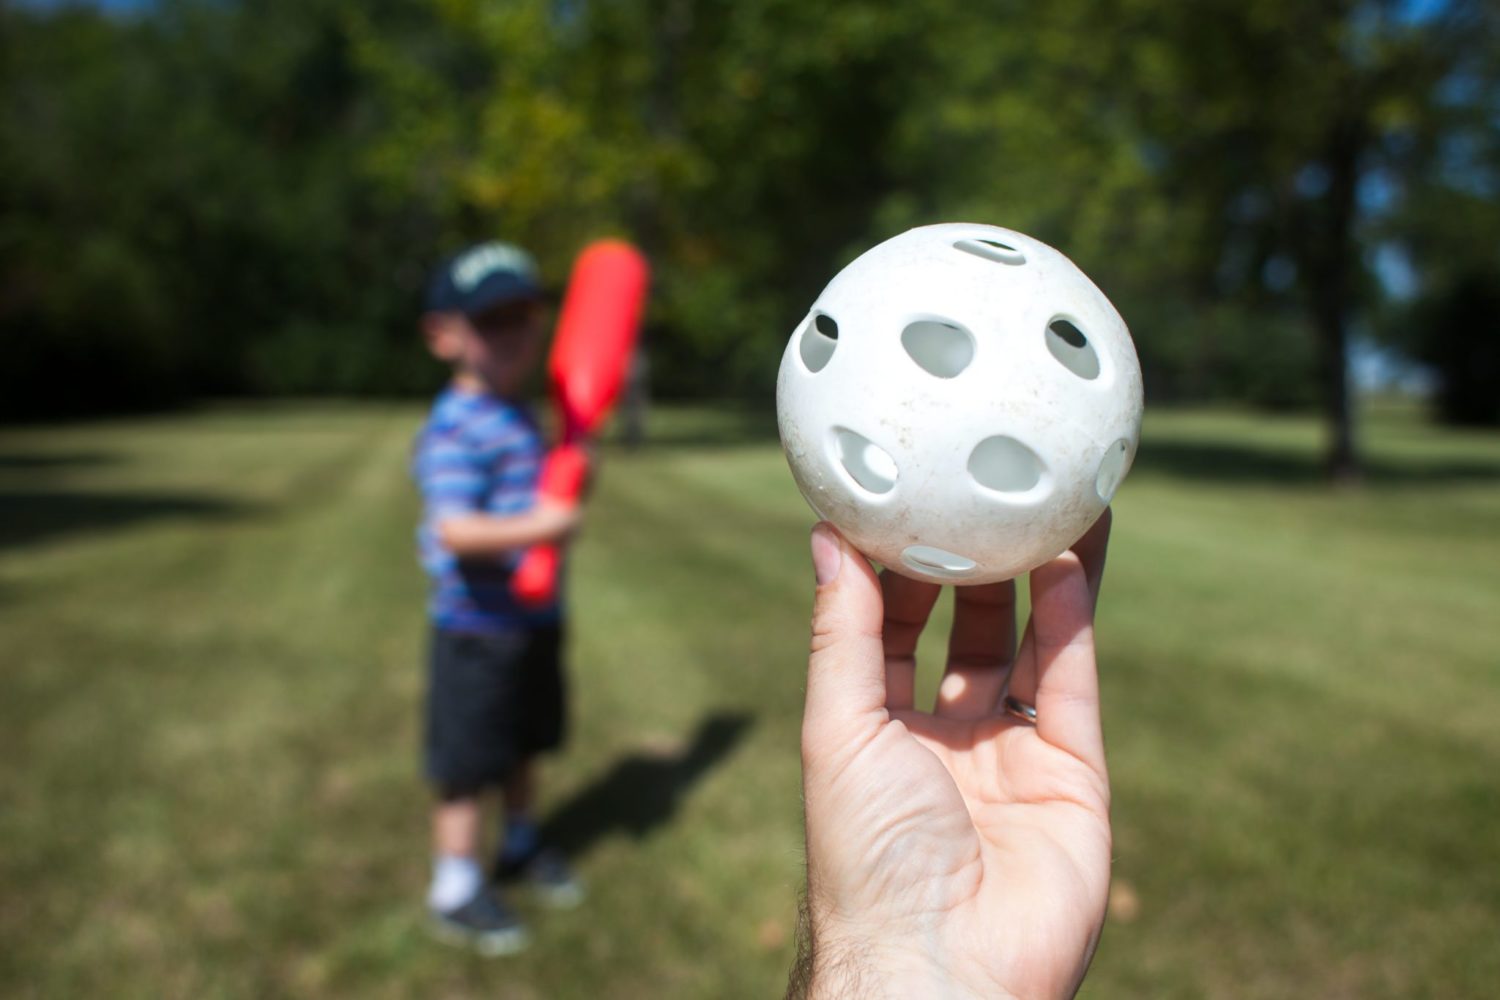 Prepping your kiddos for baseball or softball? Start them out with wiffle ball - a light weight version of those games. Learn how to play wiffleball at www.GameOnFamily.com. Game on!